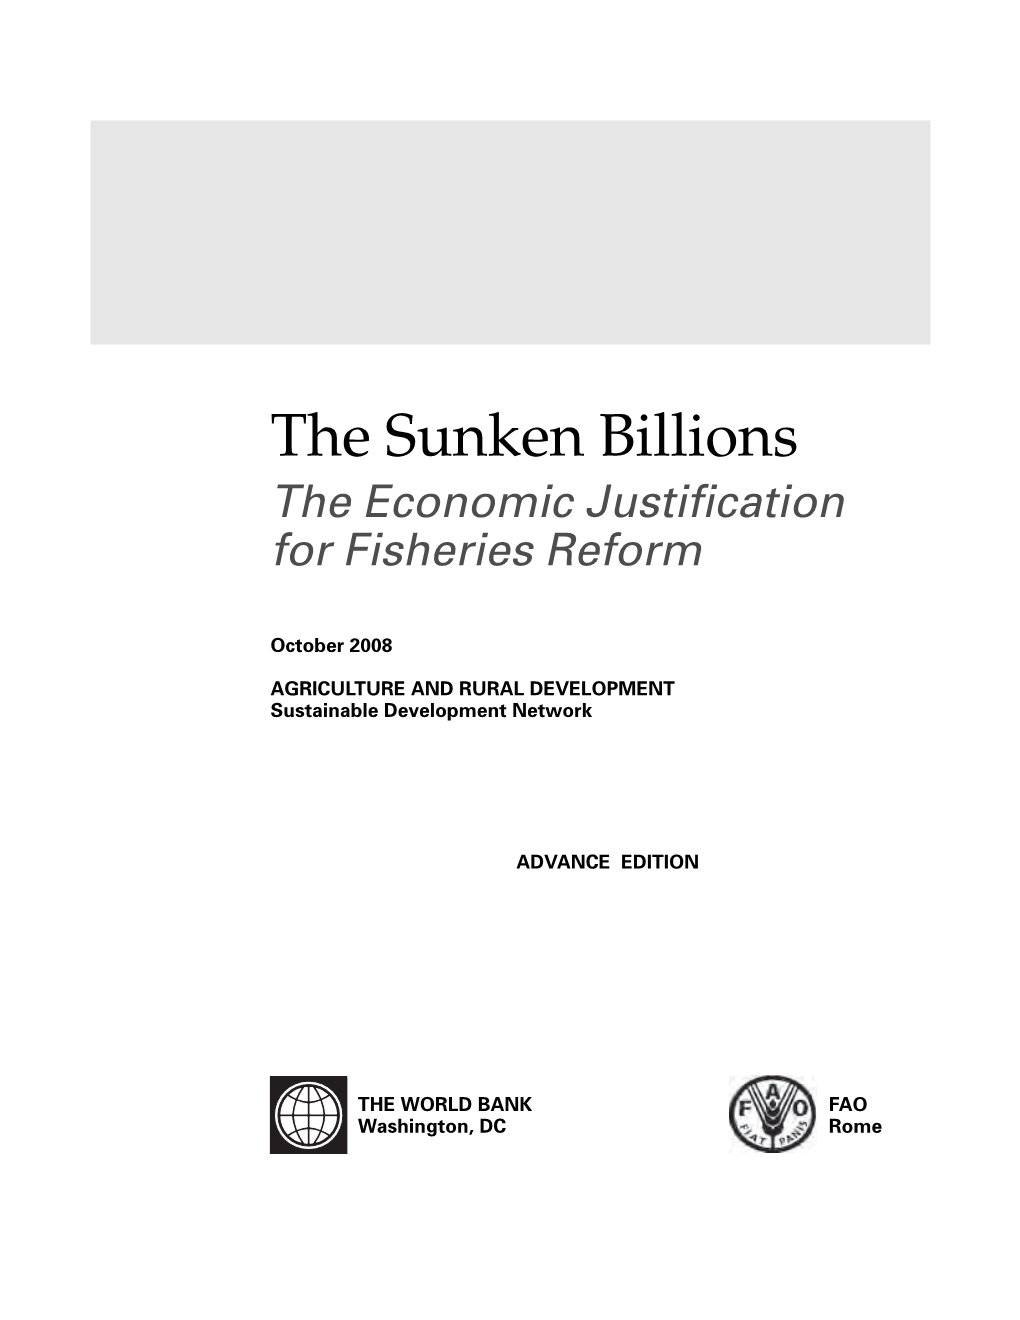 The Sunken Billions the Economic Justification for Fisheries Reform